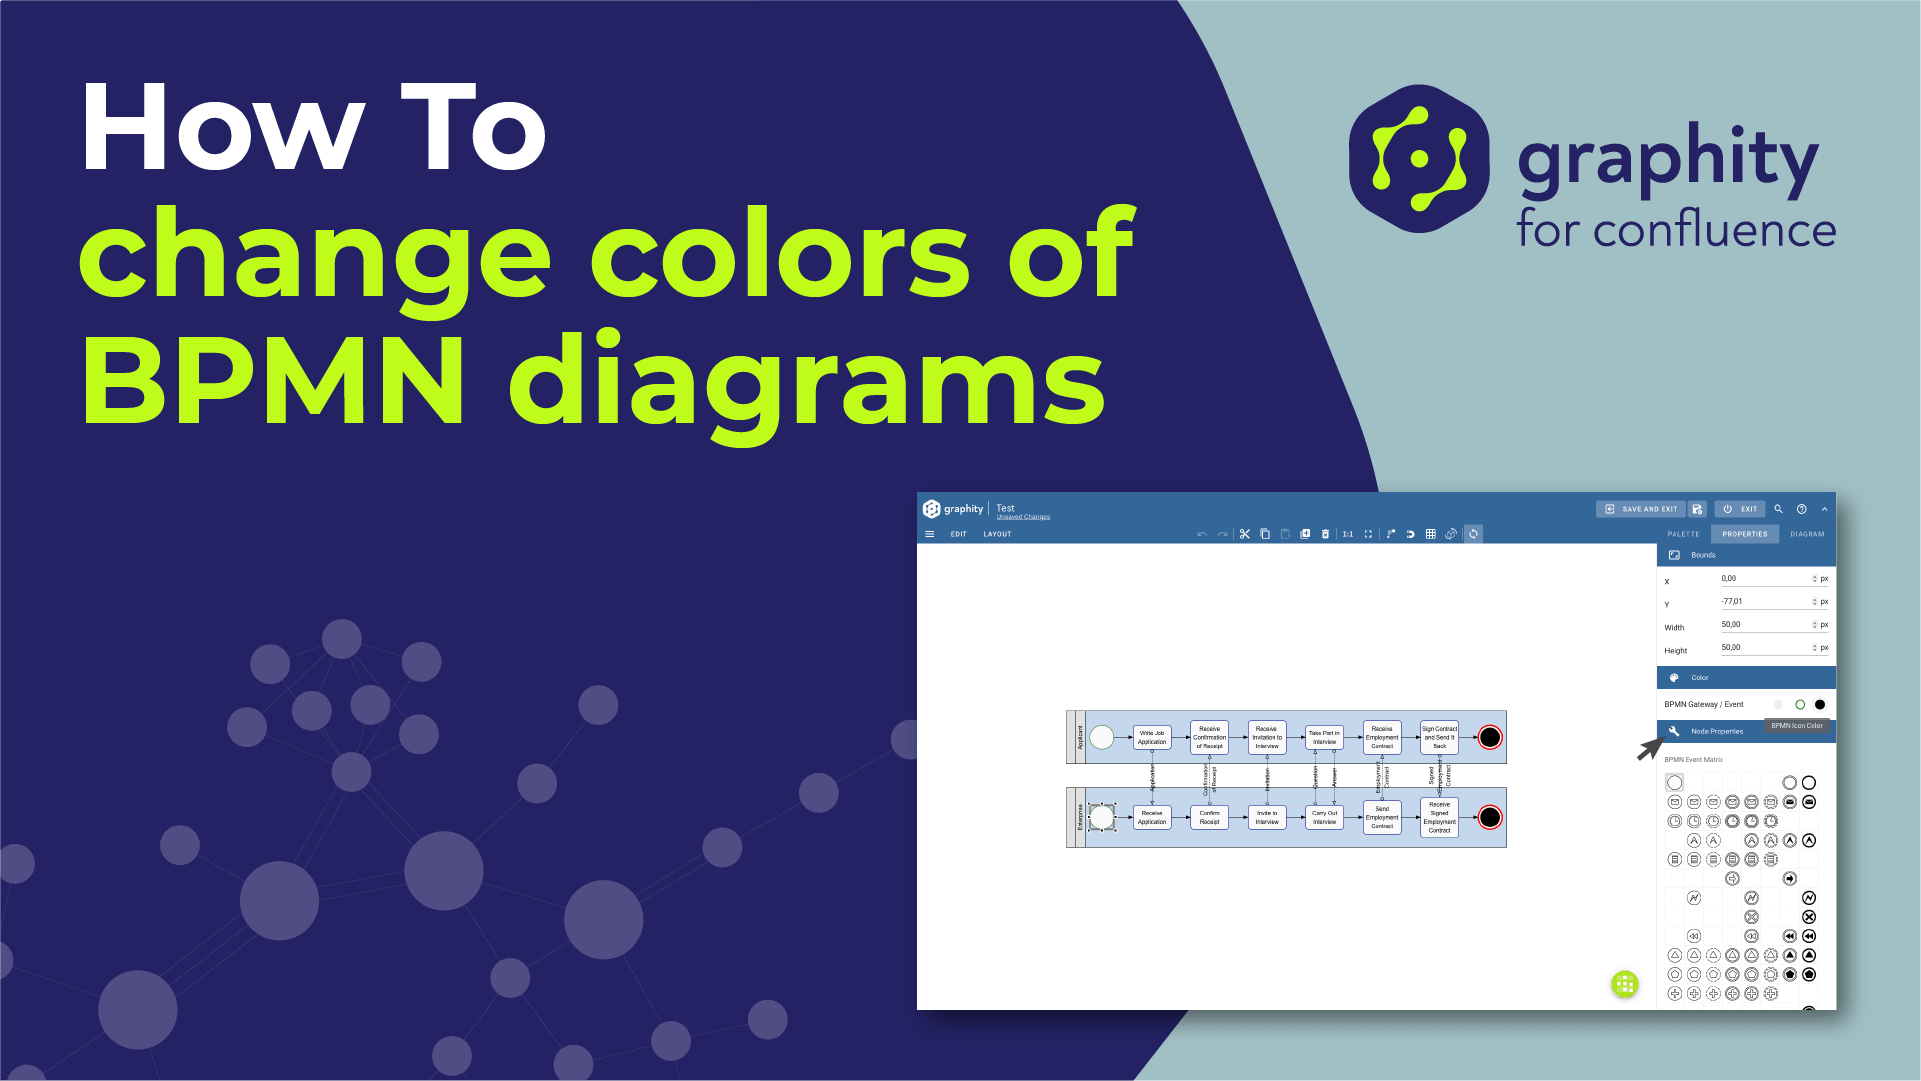 How to change colors of BPMN diagrams